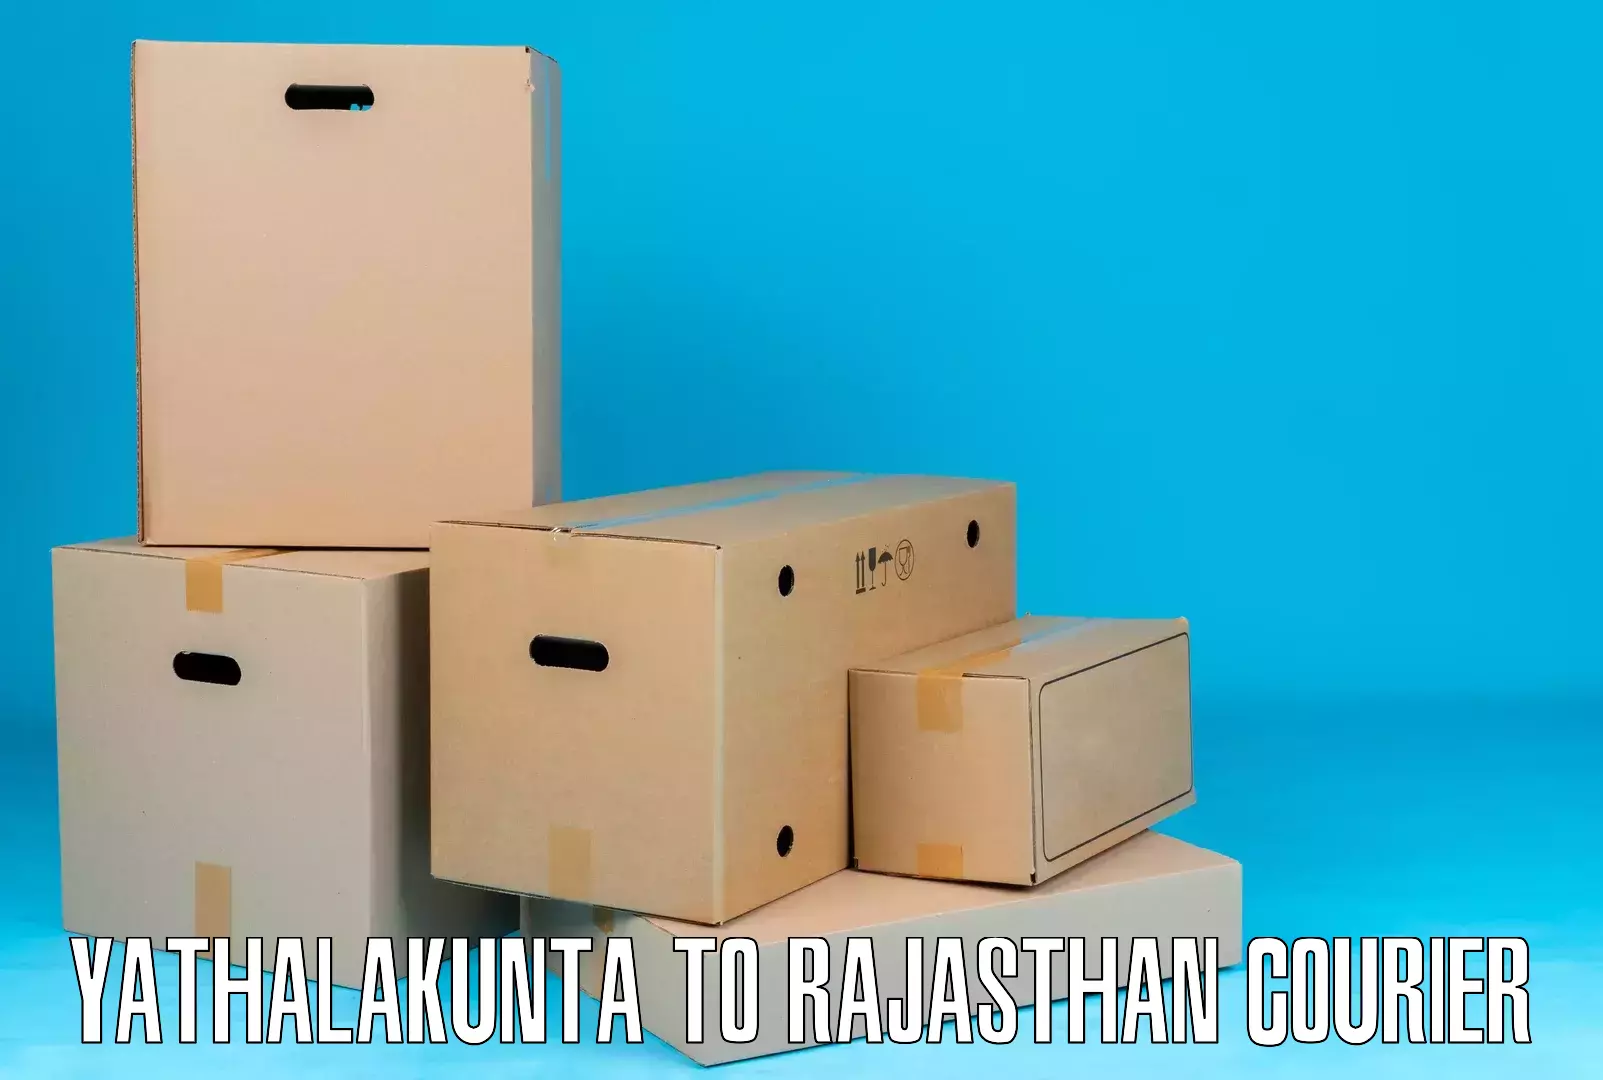 Reliable parcel services Yathalakunta to Rajasthan